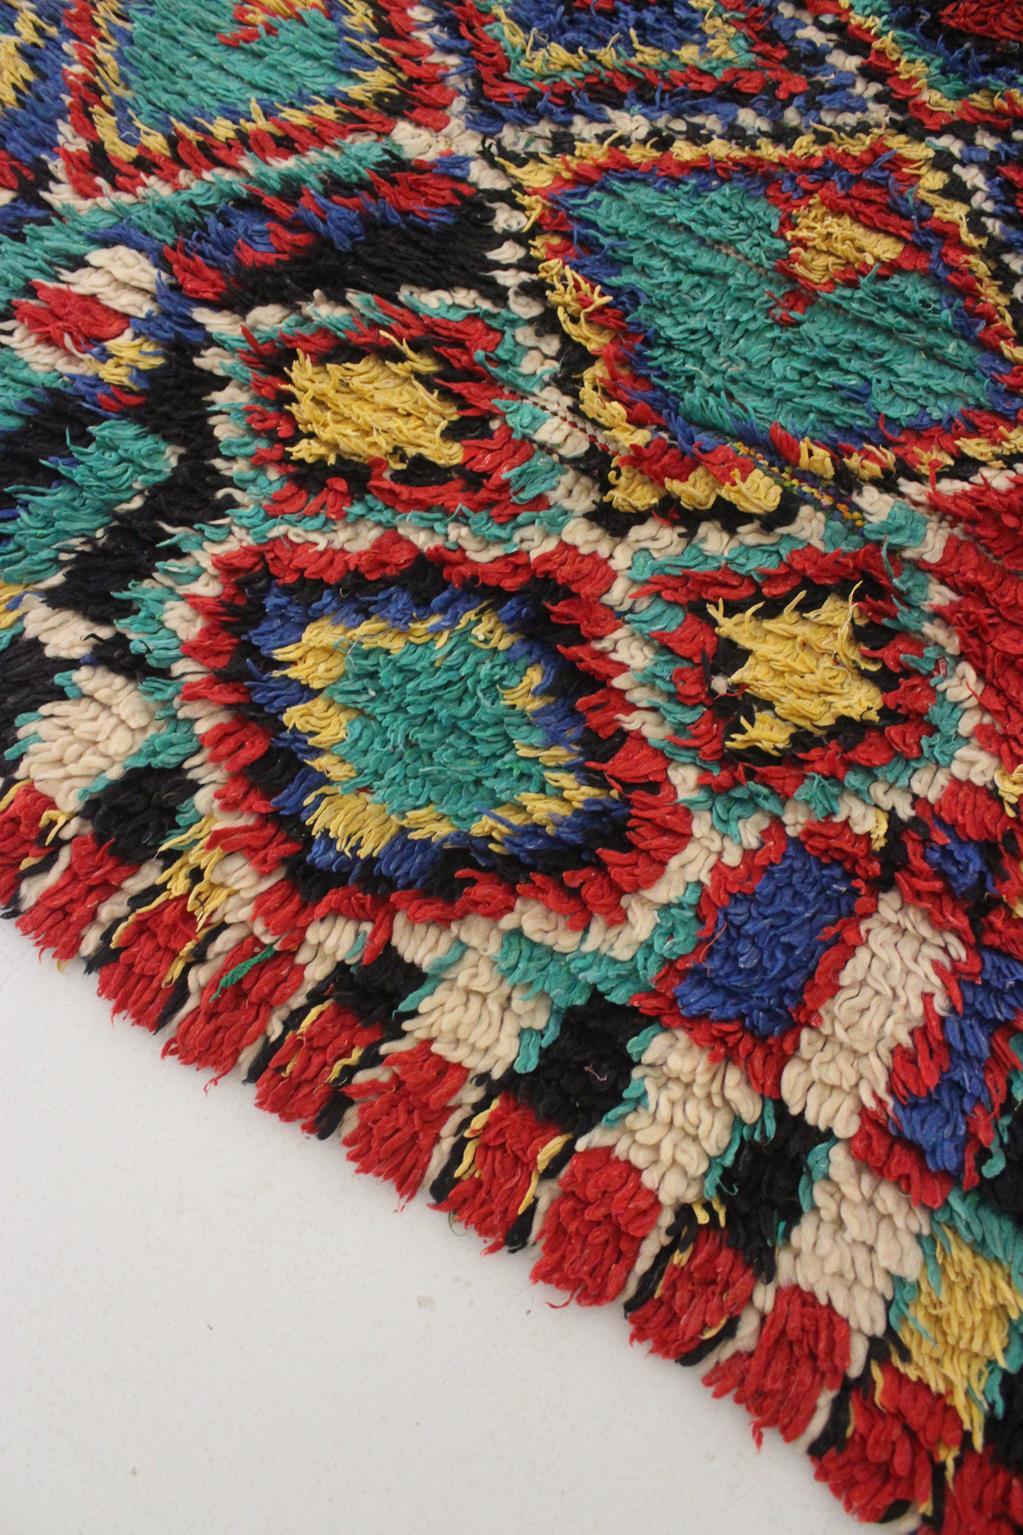 20th Century Vintage Moroccan Azilal rug - Blue/red/green - 4.1x6.5feet / 125x200cm For Sale